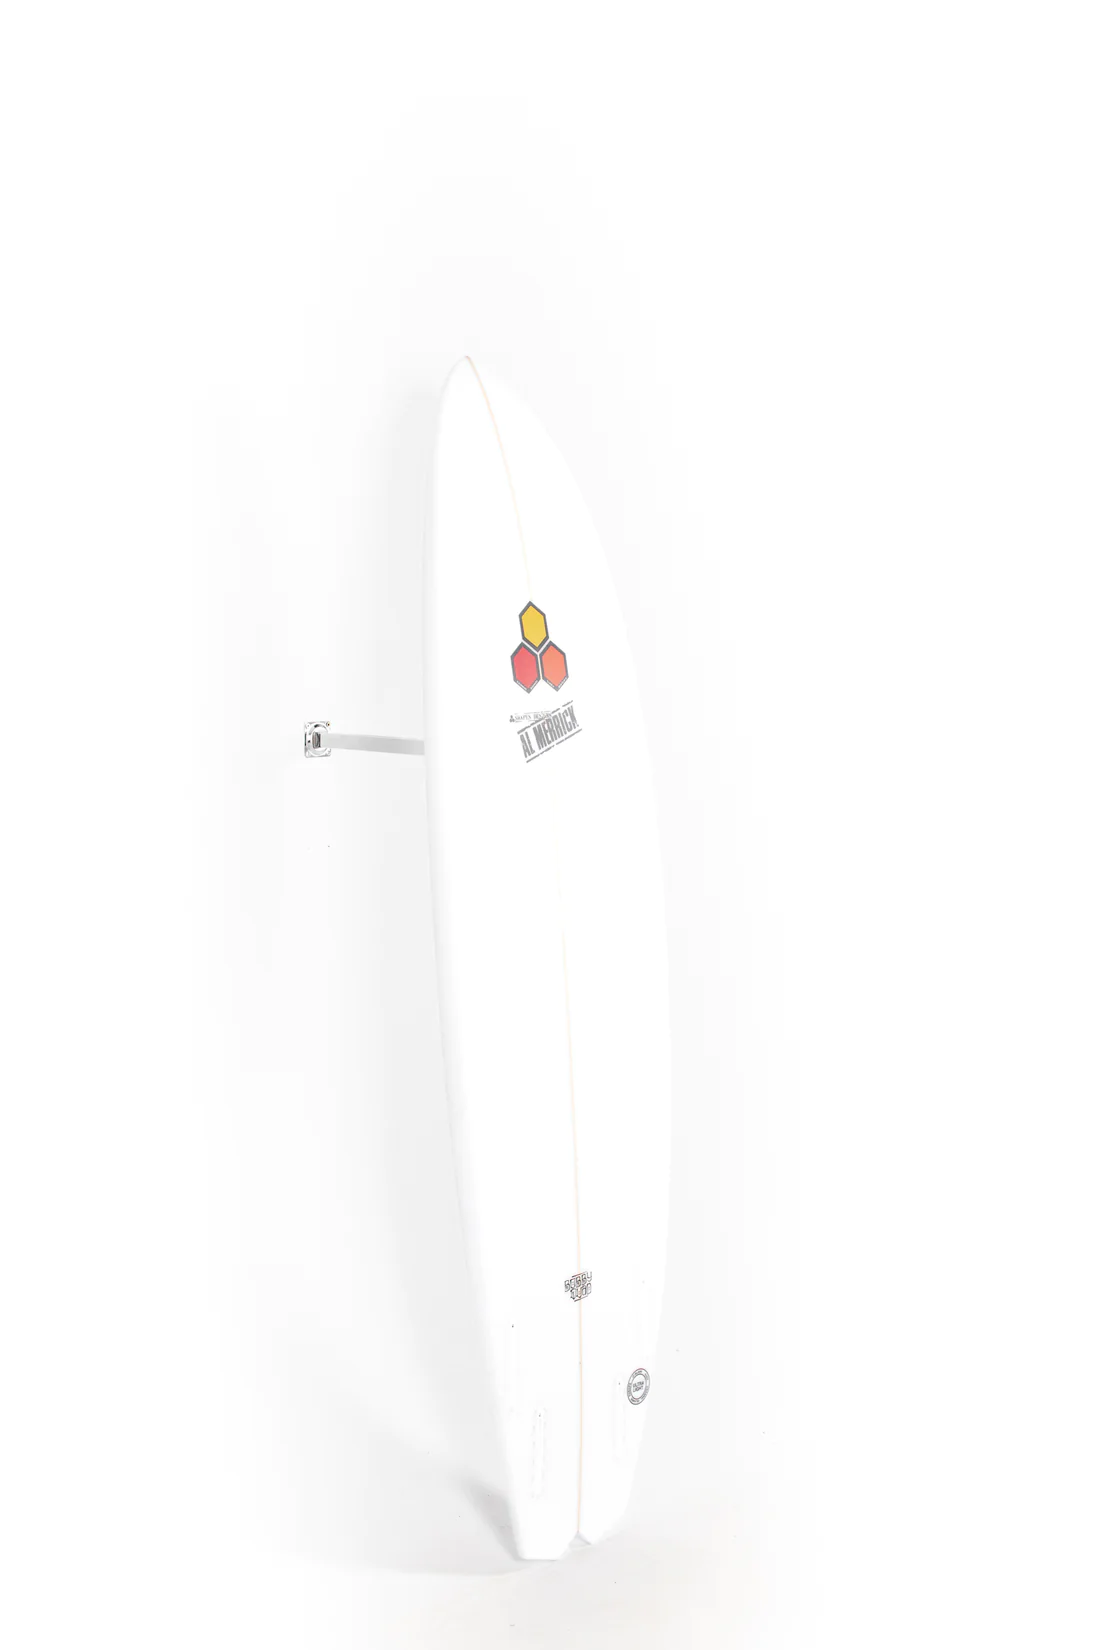 Channel Islands - BOBBY QUAD 6'2